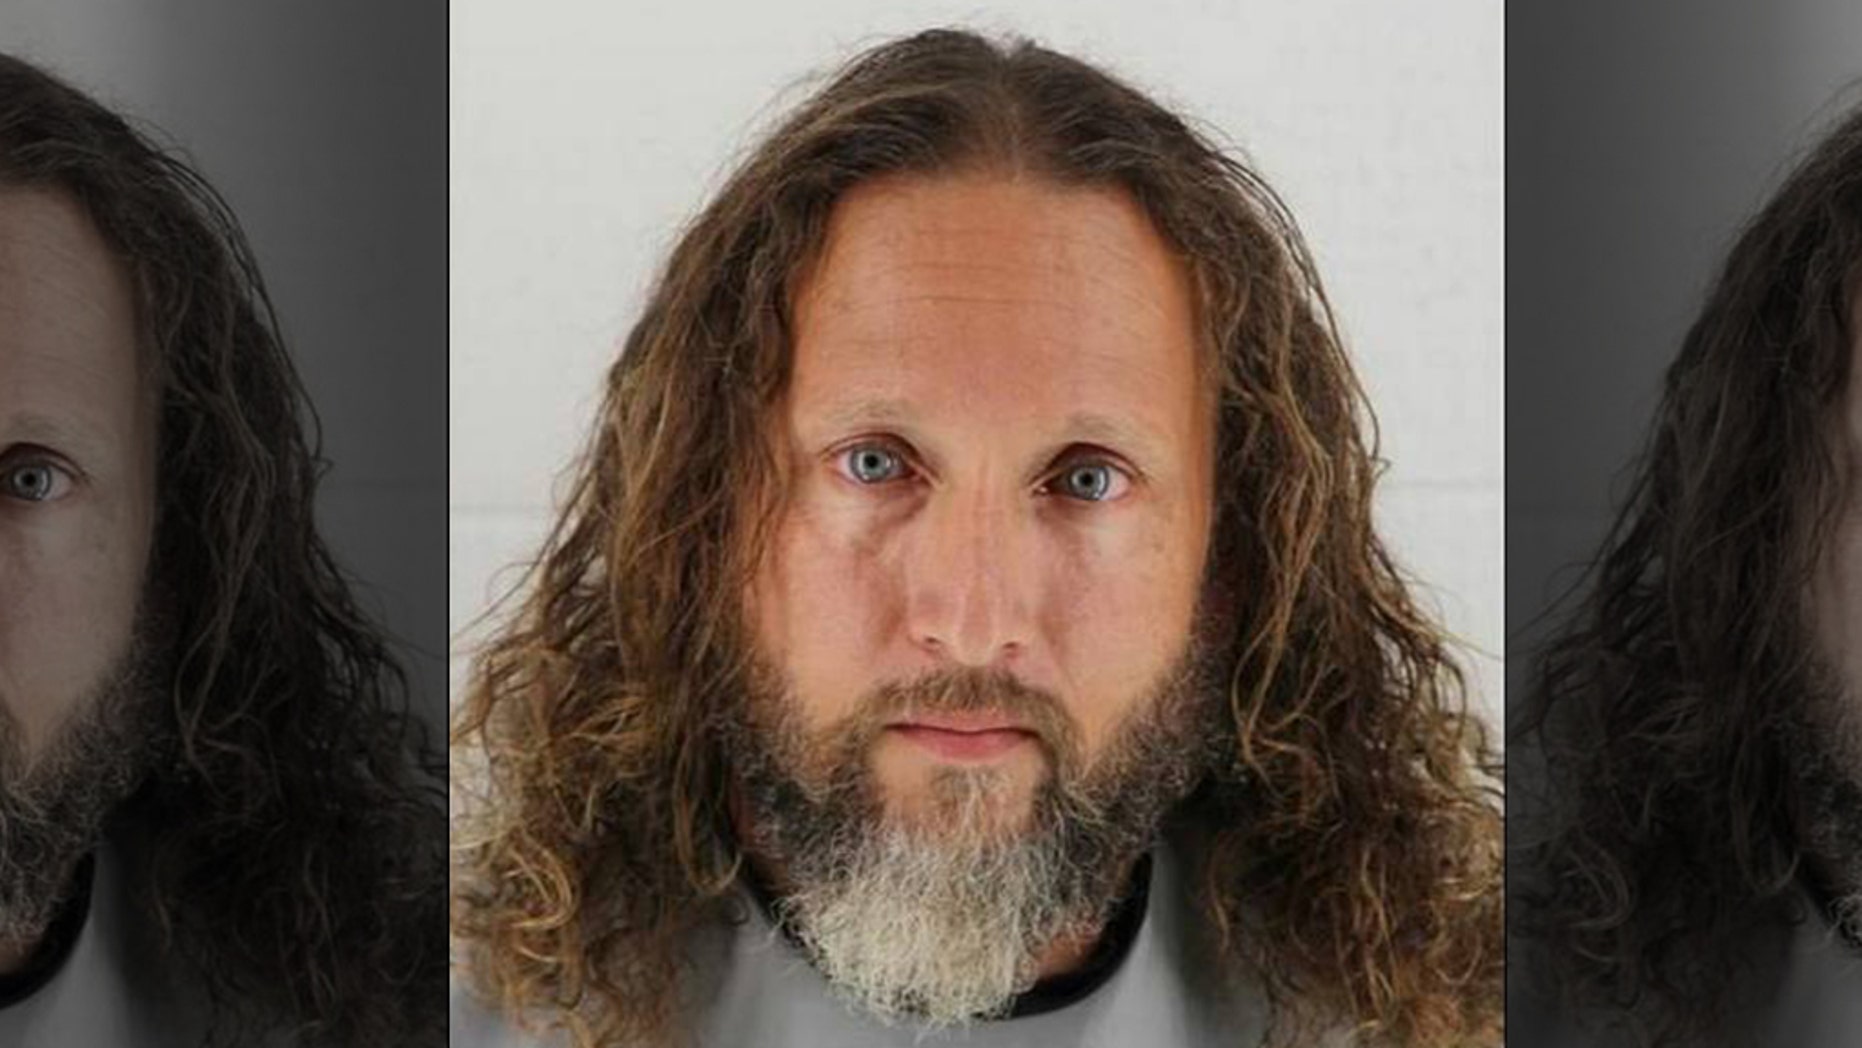 Kansas man sues for refund of church school donation after founder arrested for allegedly touching children: report